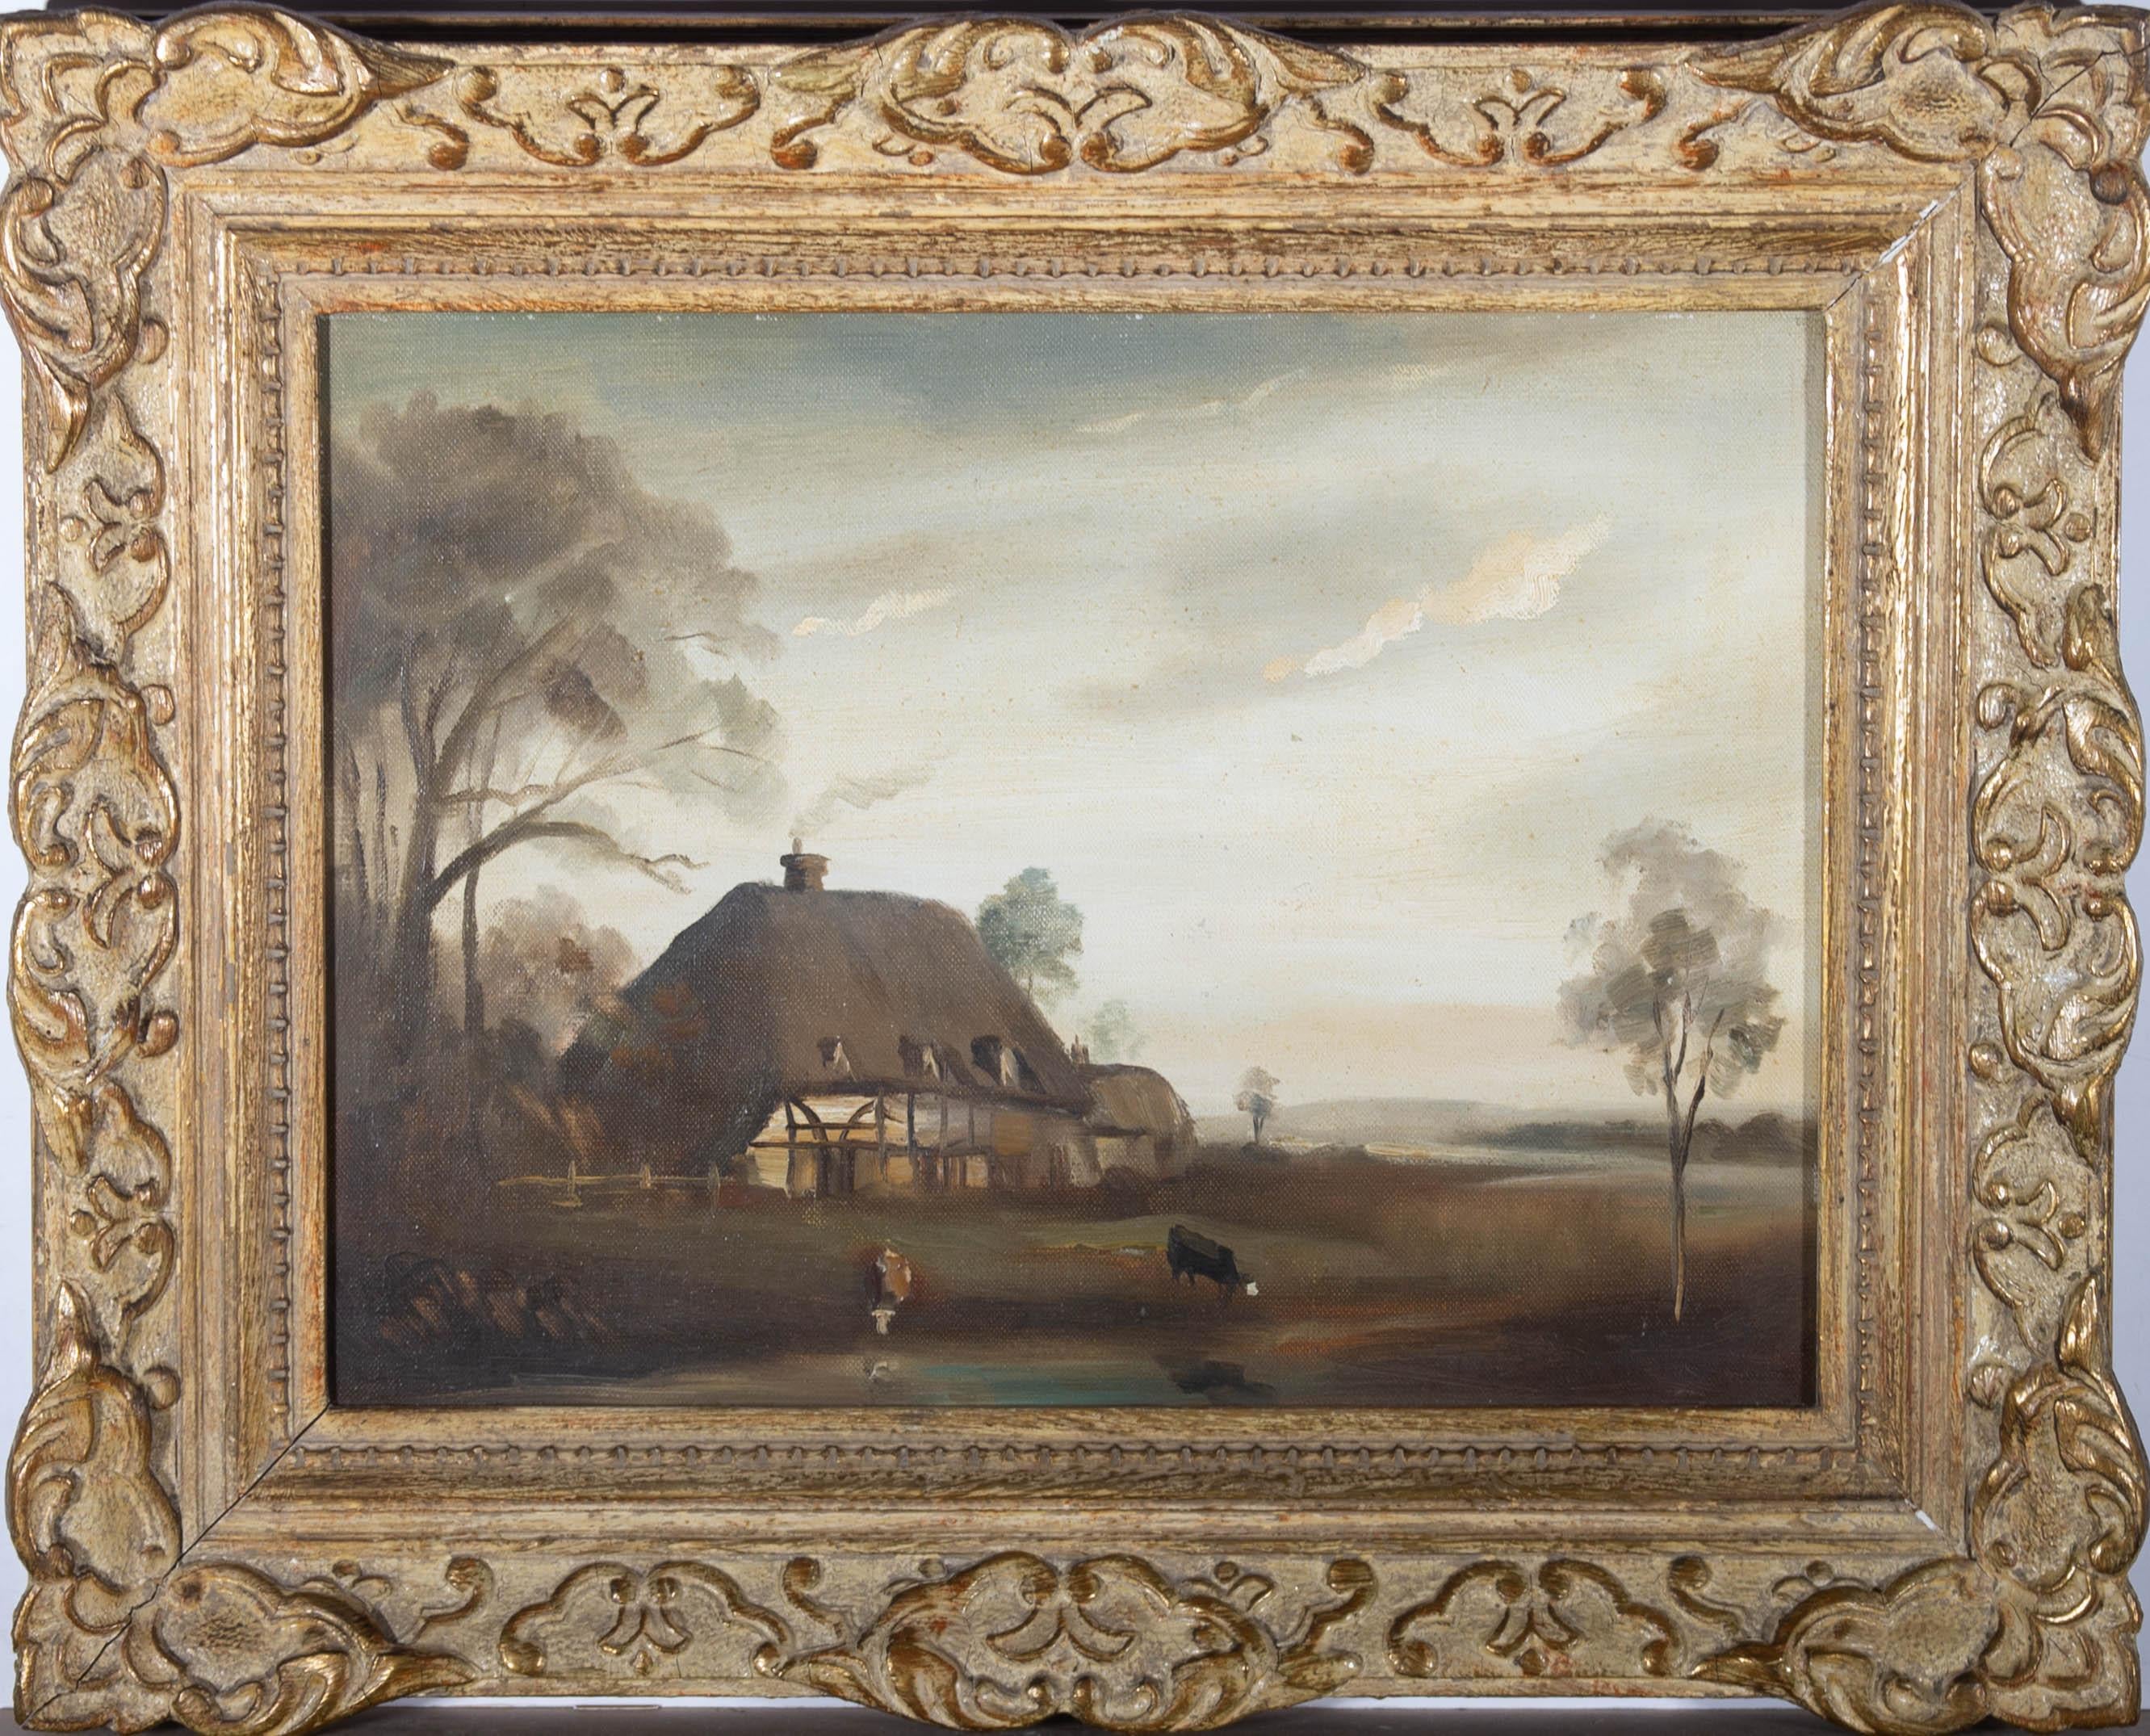 An impressionistic study of an isolated cottage in a rural landscape. Presented in an ornate gilt-effect wooden frame. Unsigned. The painting was acquired by Sulis Fine Art along with a signed work by Padwick and is typical of his style. The cows,